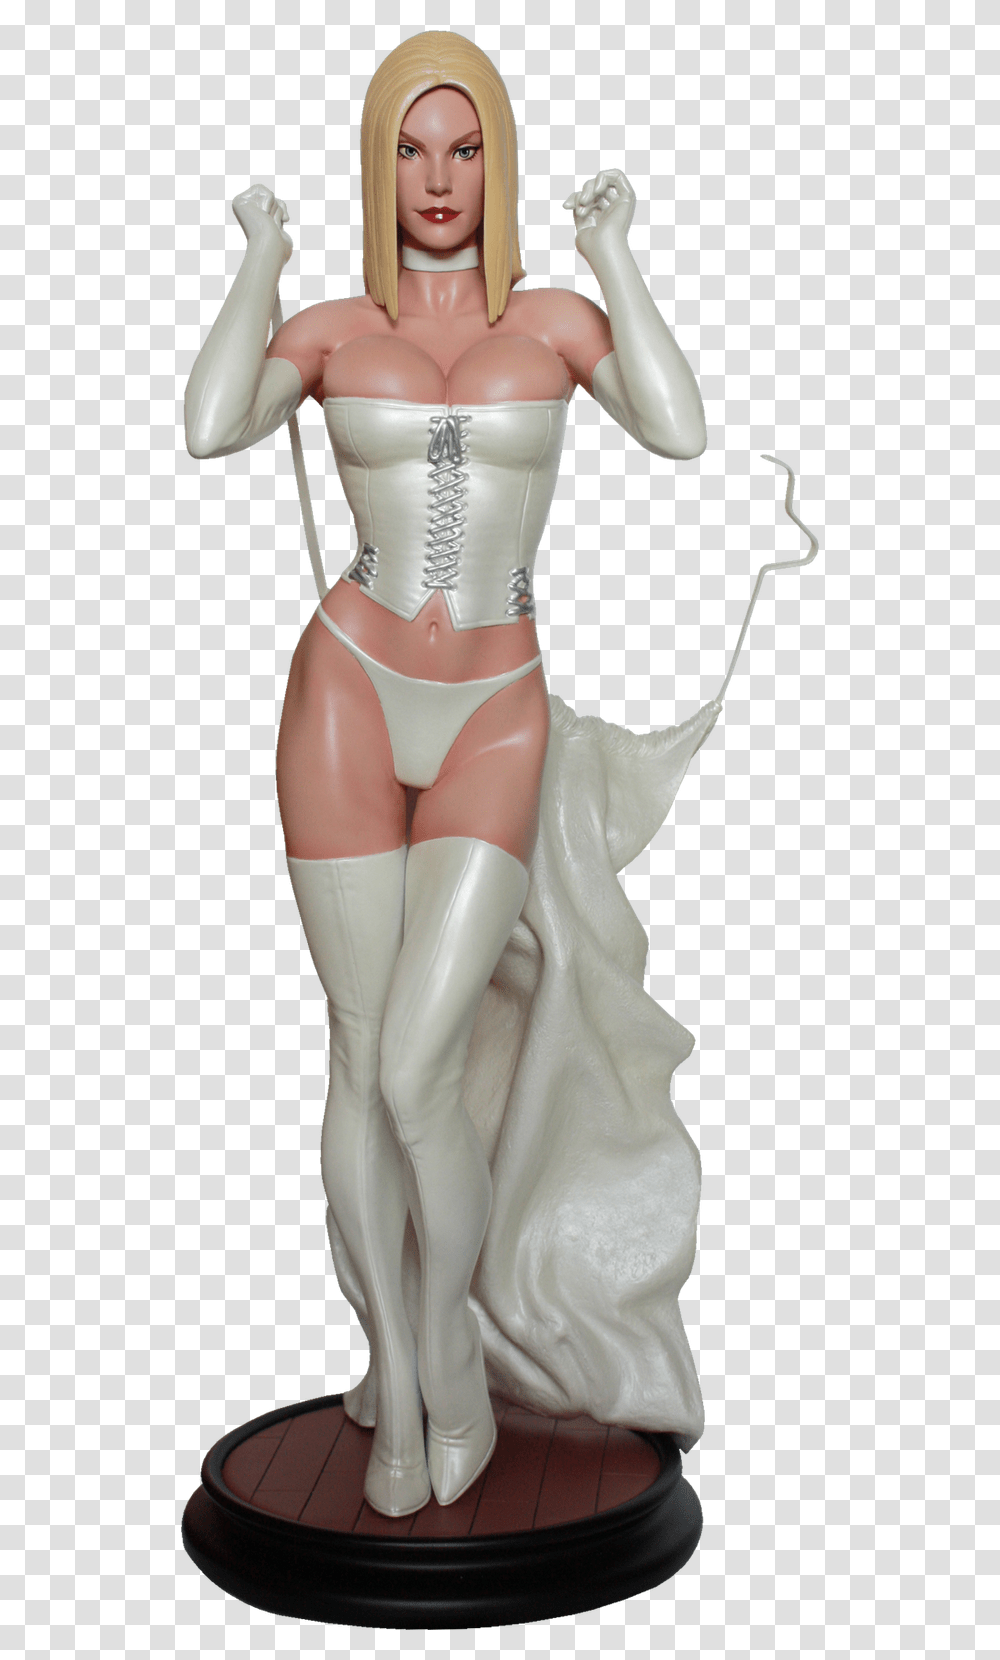 White Queen Emma Frost Statue By Sideshow Collectibles Figurine, Apparel, Lingerie, Underwear Transparent Png